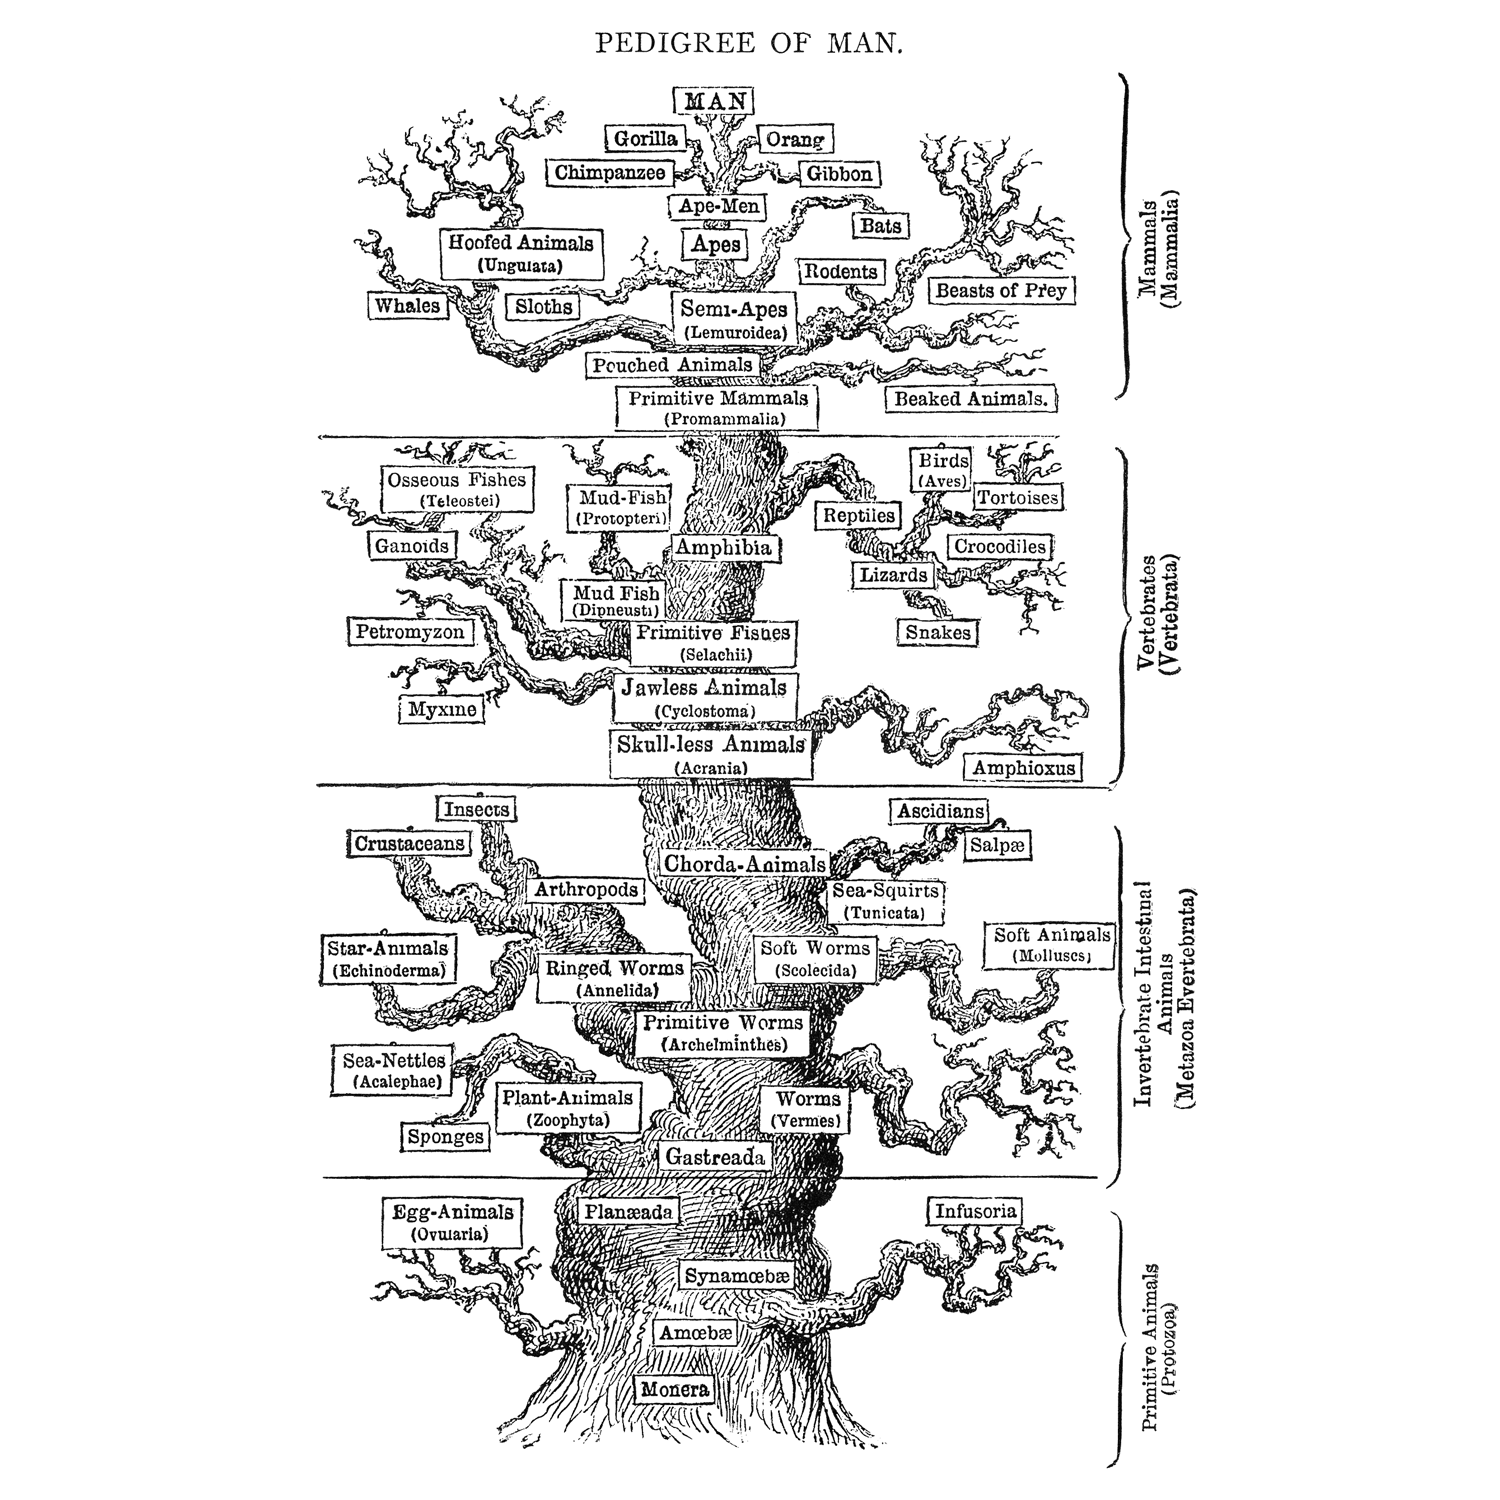 Ernst Haeckel's hypothesis for animal phylogeny.